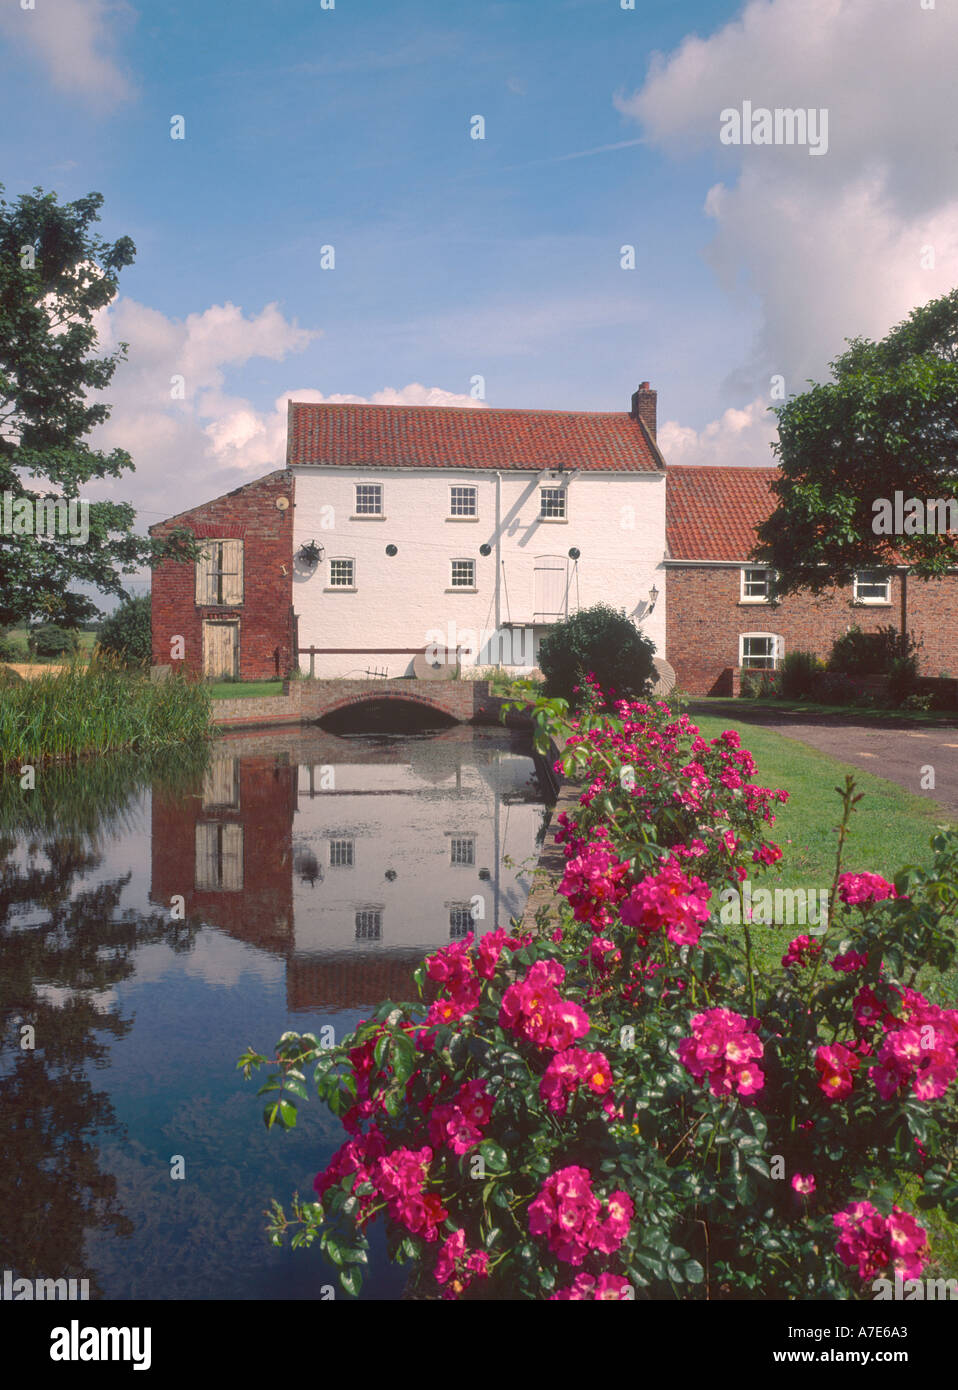 Alvingham Mill near Louth in Lincolnshire England UK Stock Photo